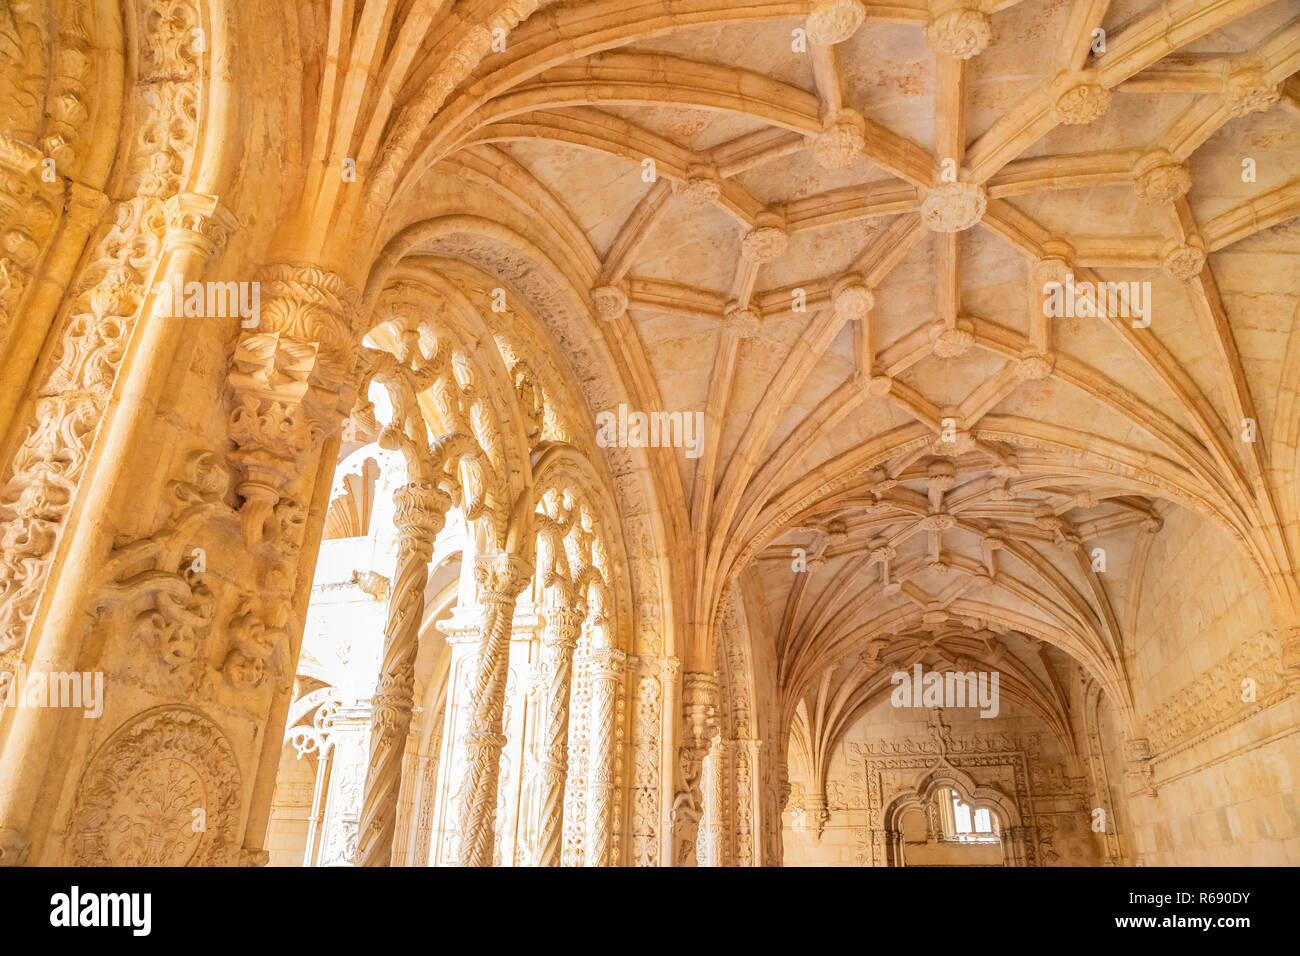 Ornate archway inside S. Jeronimos monastery in Lisbon, Portugal Stock Photo